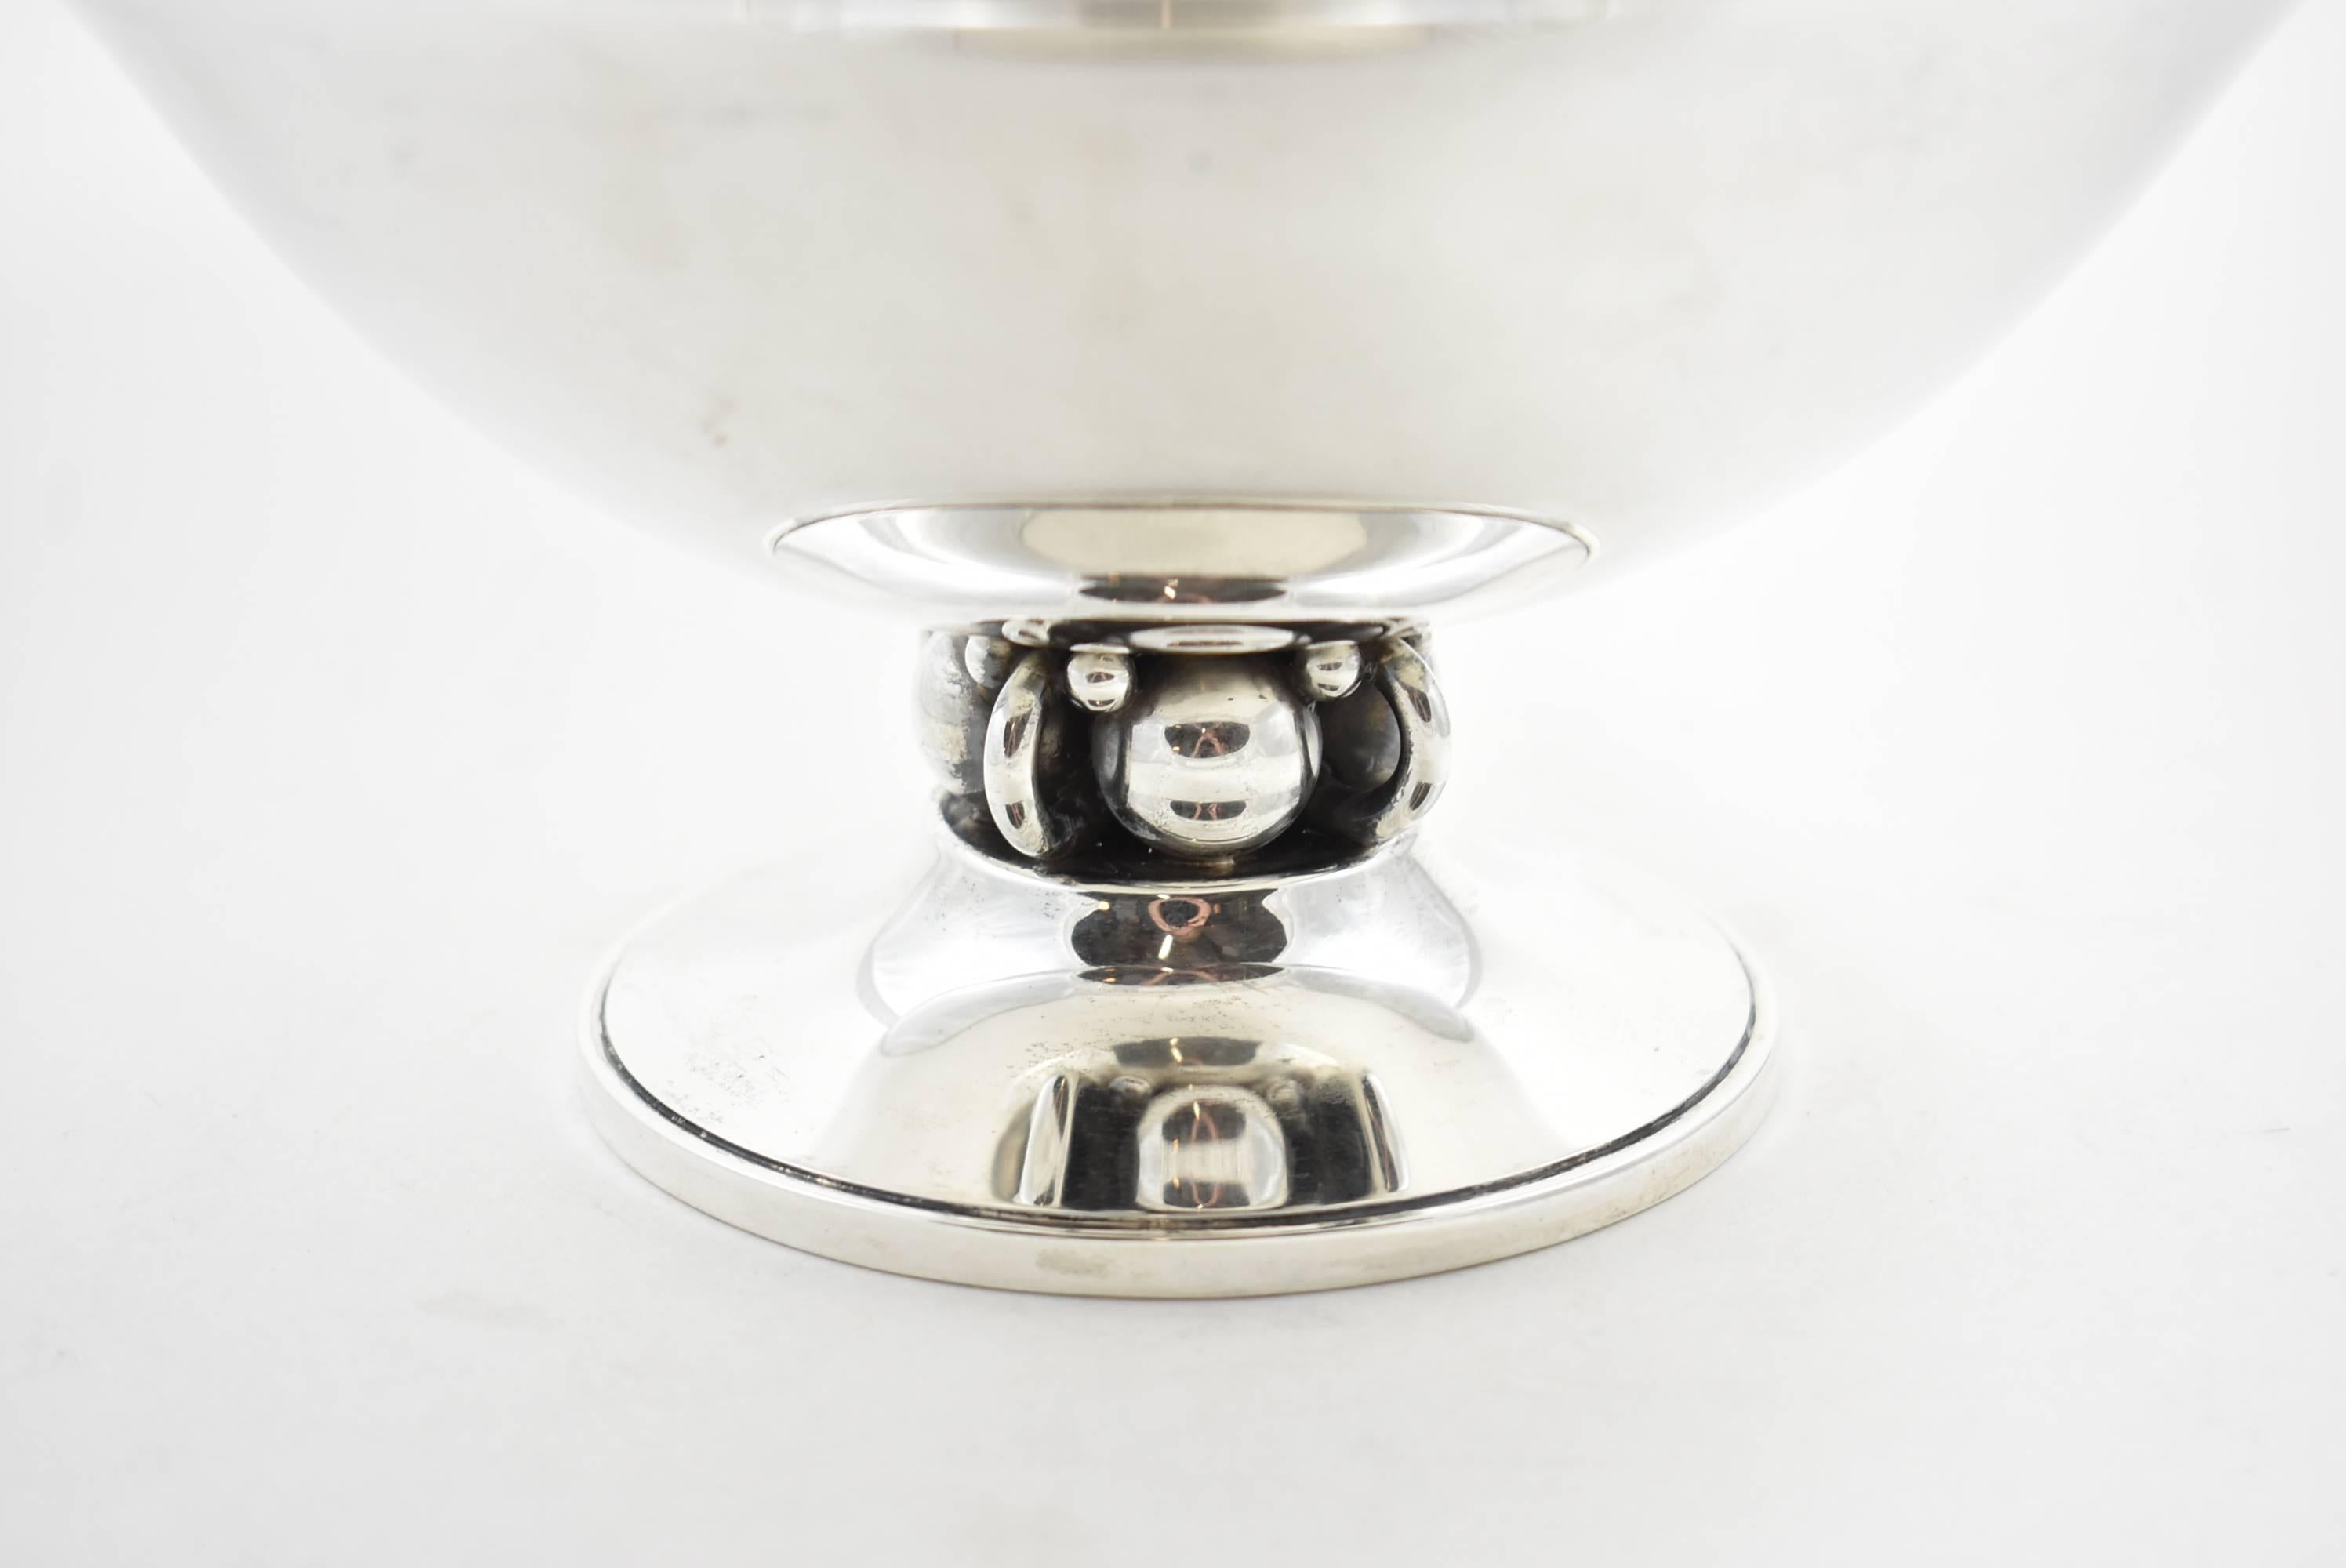 An impressive sterling silver bowl by Alphonse Lapaglia for International Sterling. Alphonse Lapaglia is known for his distinct designs and studied under Georg Jensen. This bowl has loop and ball detail on a footed bottom. It is numbered 139 14 on